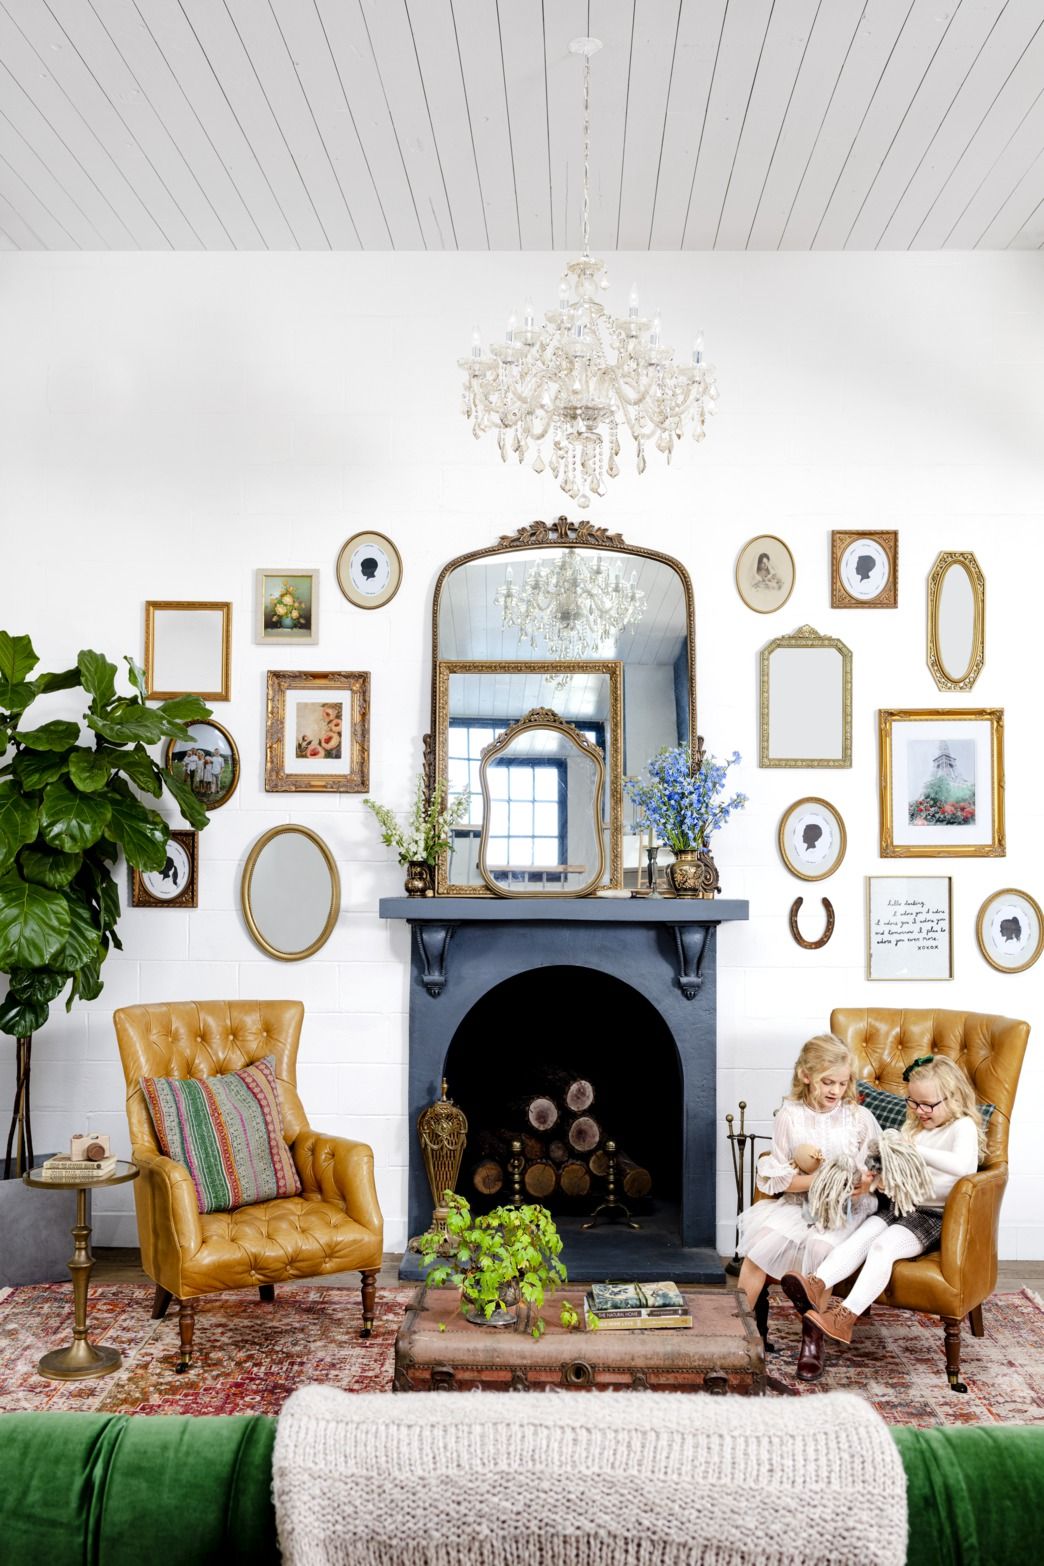 Living Room Decor Fireplace : 15 Ideas For Decorating Your Mantel Year